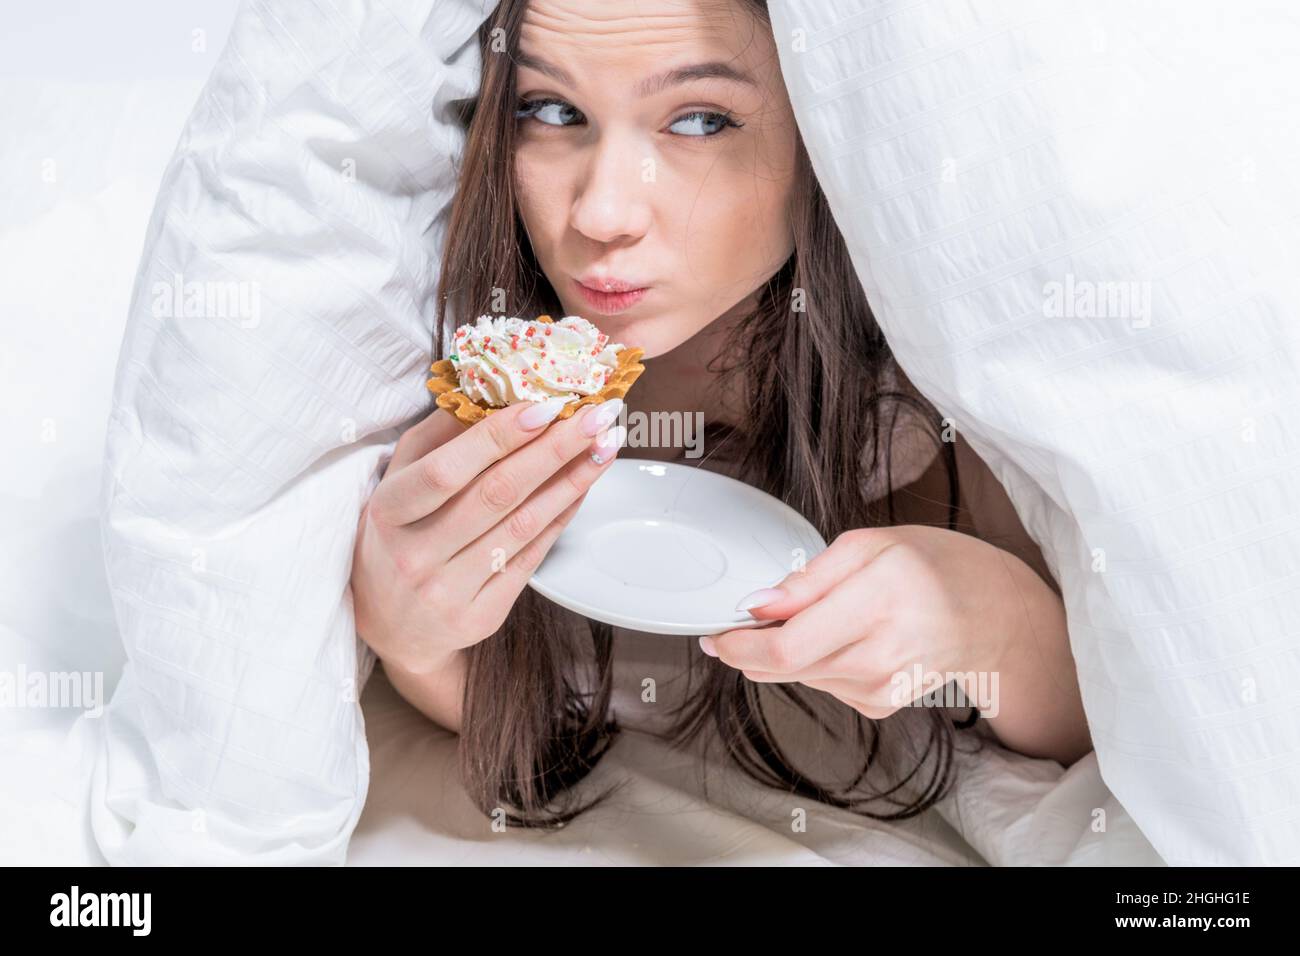 A cute woman is furtively, unnoticed, eating a cupcake, lying on the bed under the covers. Breakfast in bed. Dessert. Calories. Stock Photo